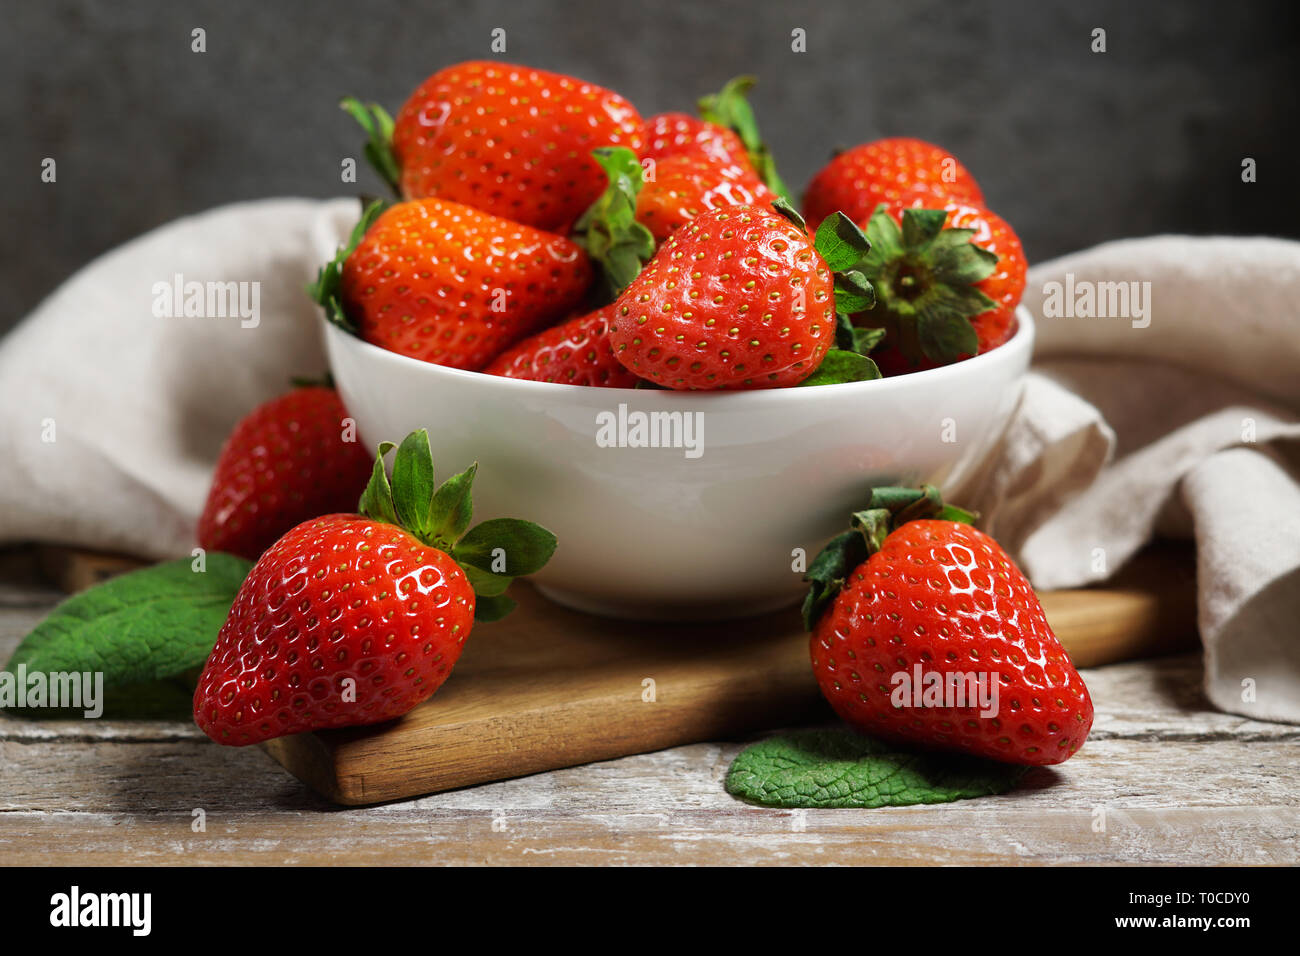 Strawberry concept with a group of ripe red strawberries in a white bowl close up frontal view on a vintage rustic wooden table on background. Stock Photo